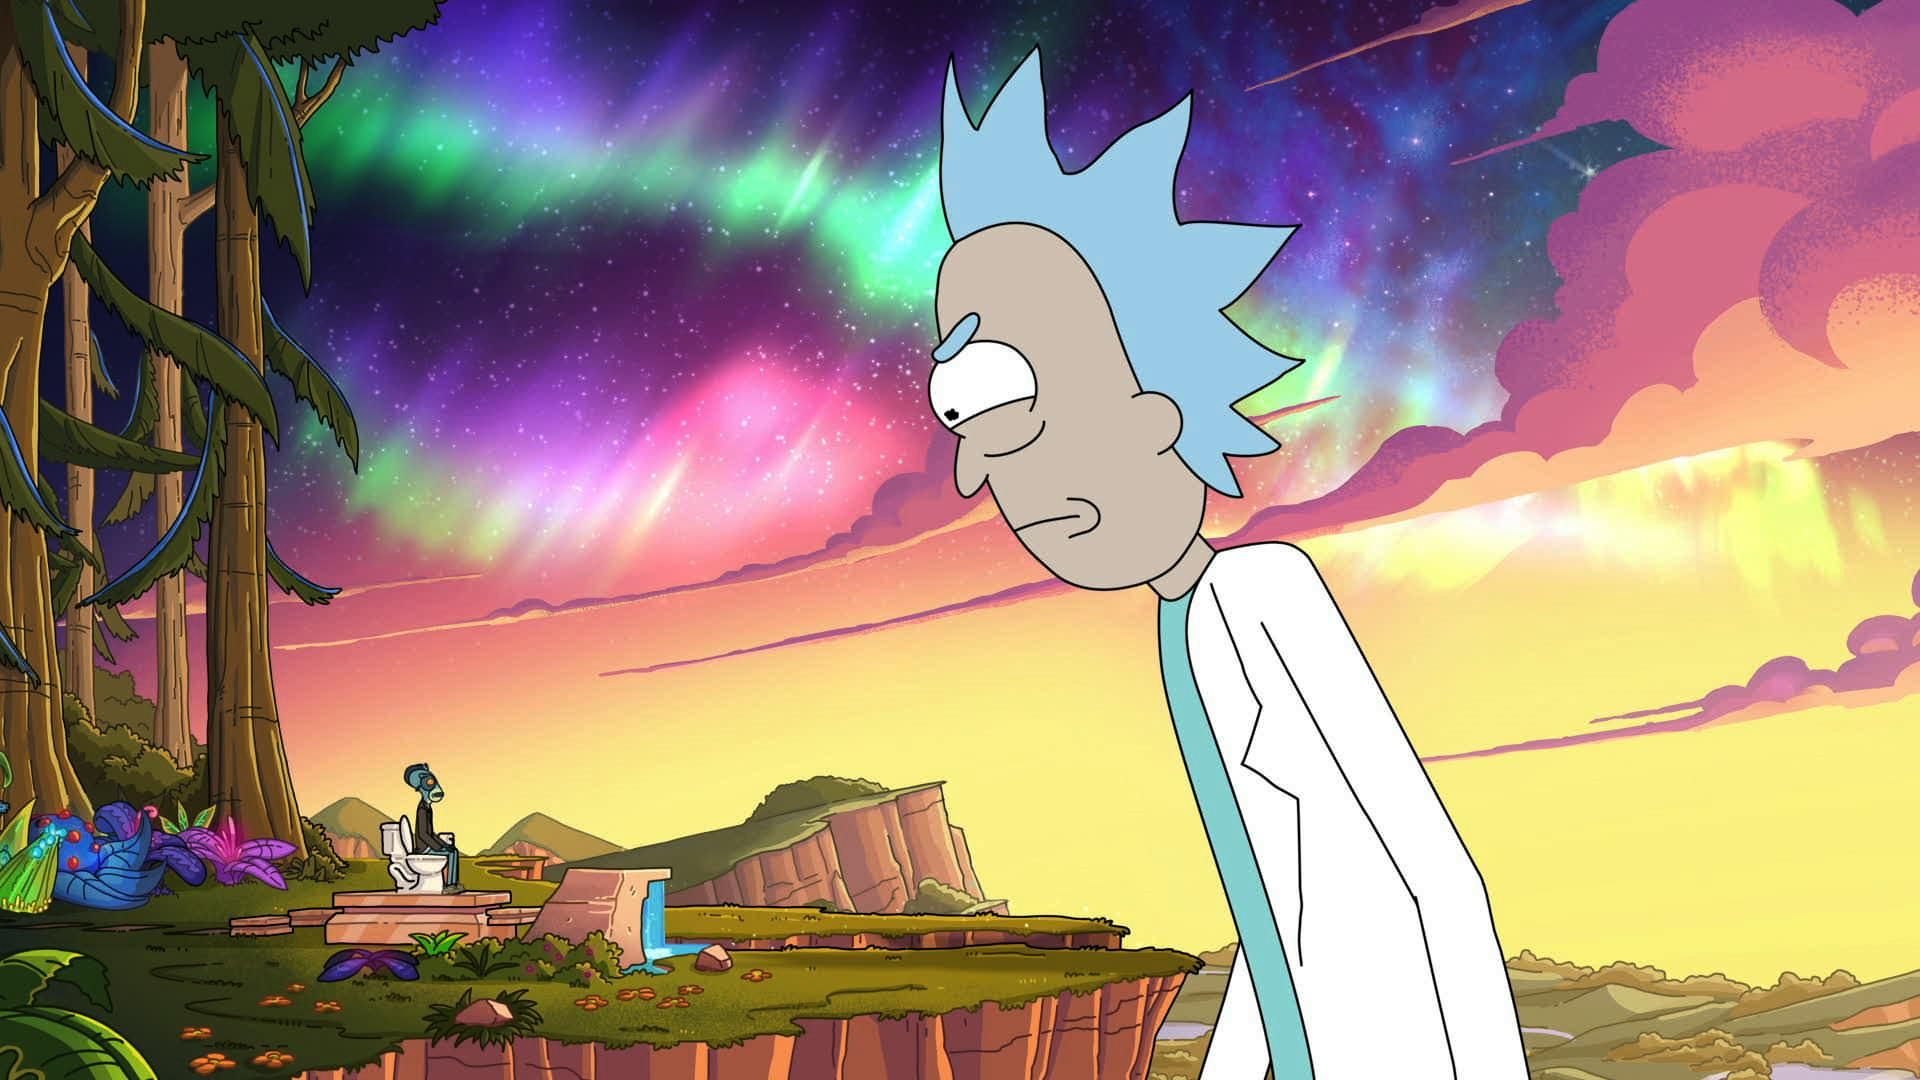 Rick and Morty Season 4 Episode 6 March 2020 Release Date Possible